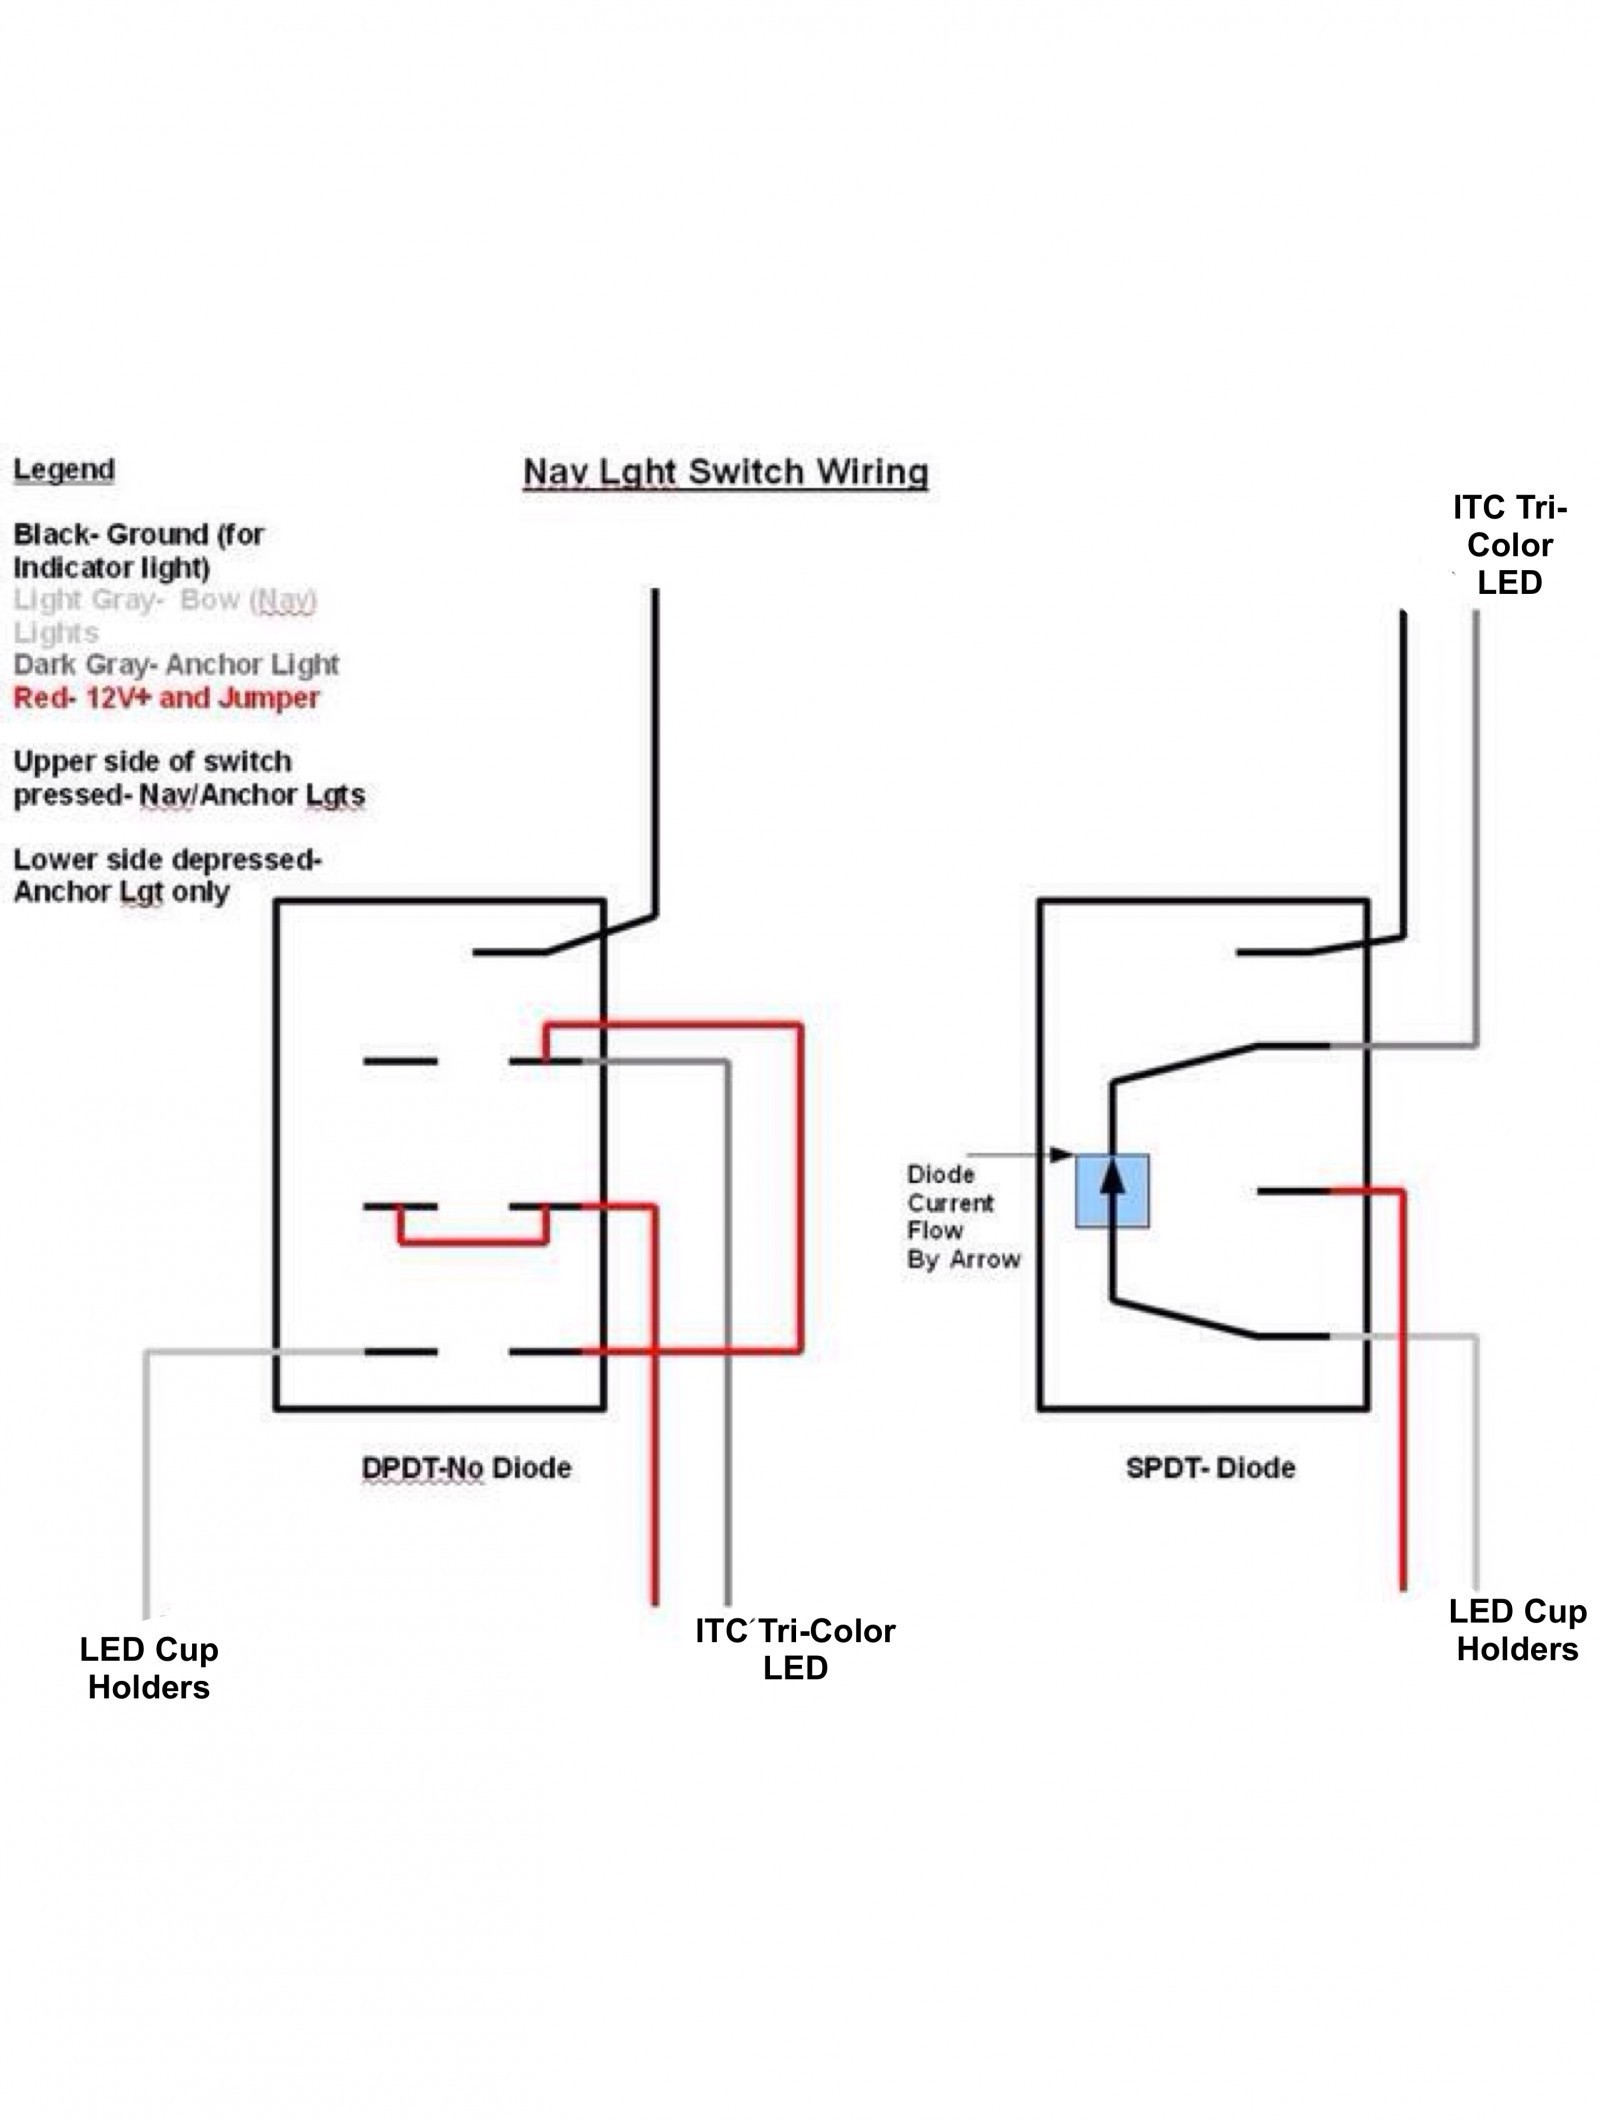 Wiring A Nz Light Switch - Today Wiring Diagram - Double Light Switch Wiring Diagram